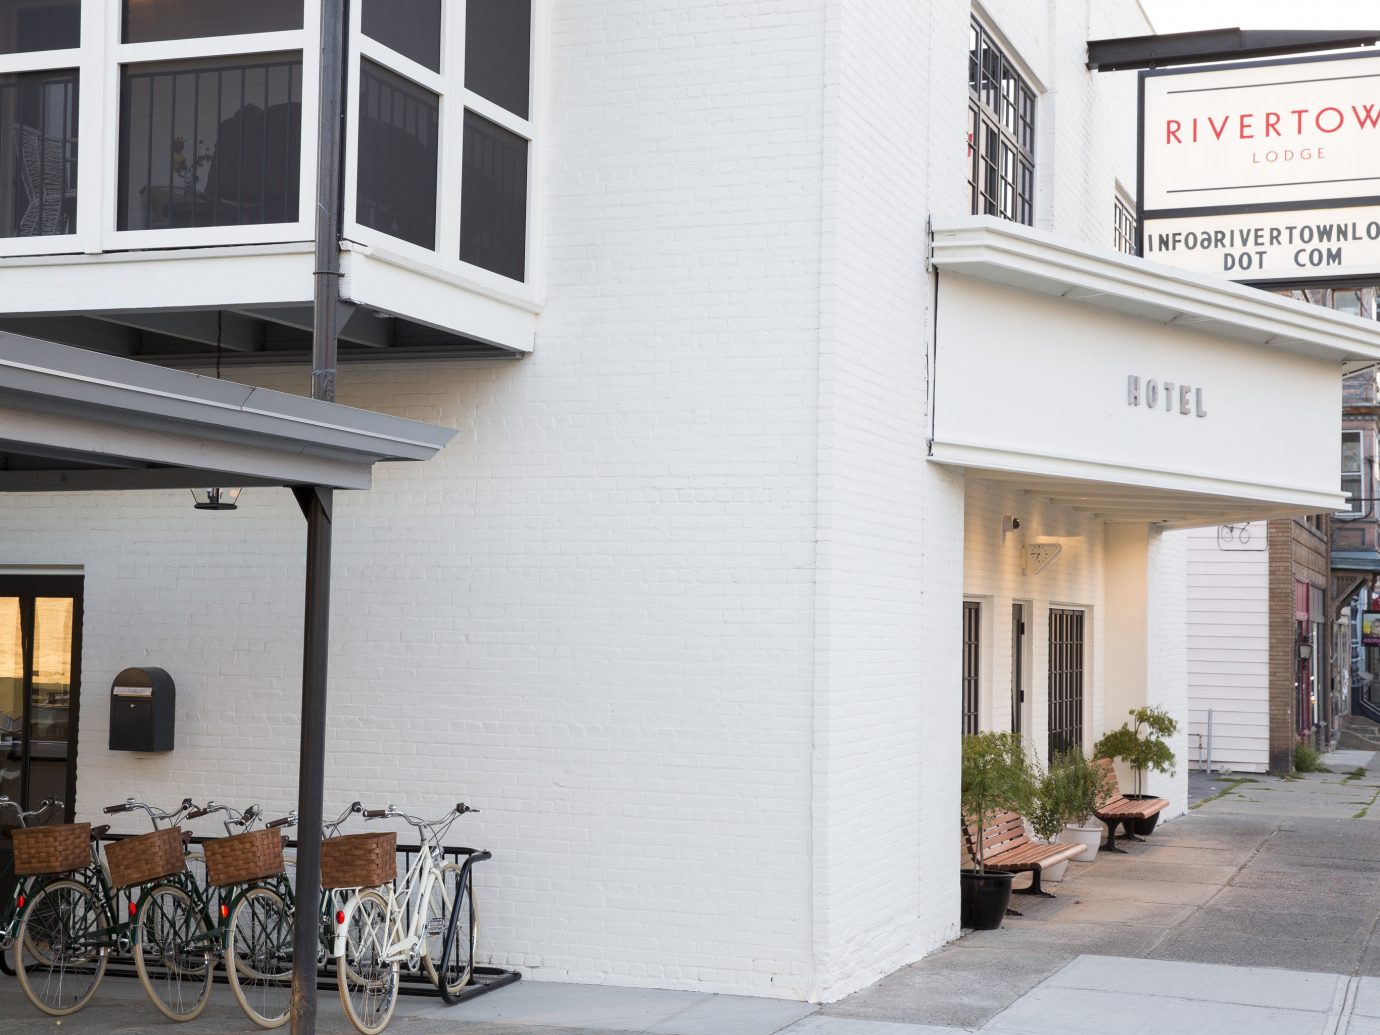 Hotels Style + Design Trip Ideas building outdoor bicycle property parked home facade interior design restaurant porch scooter